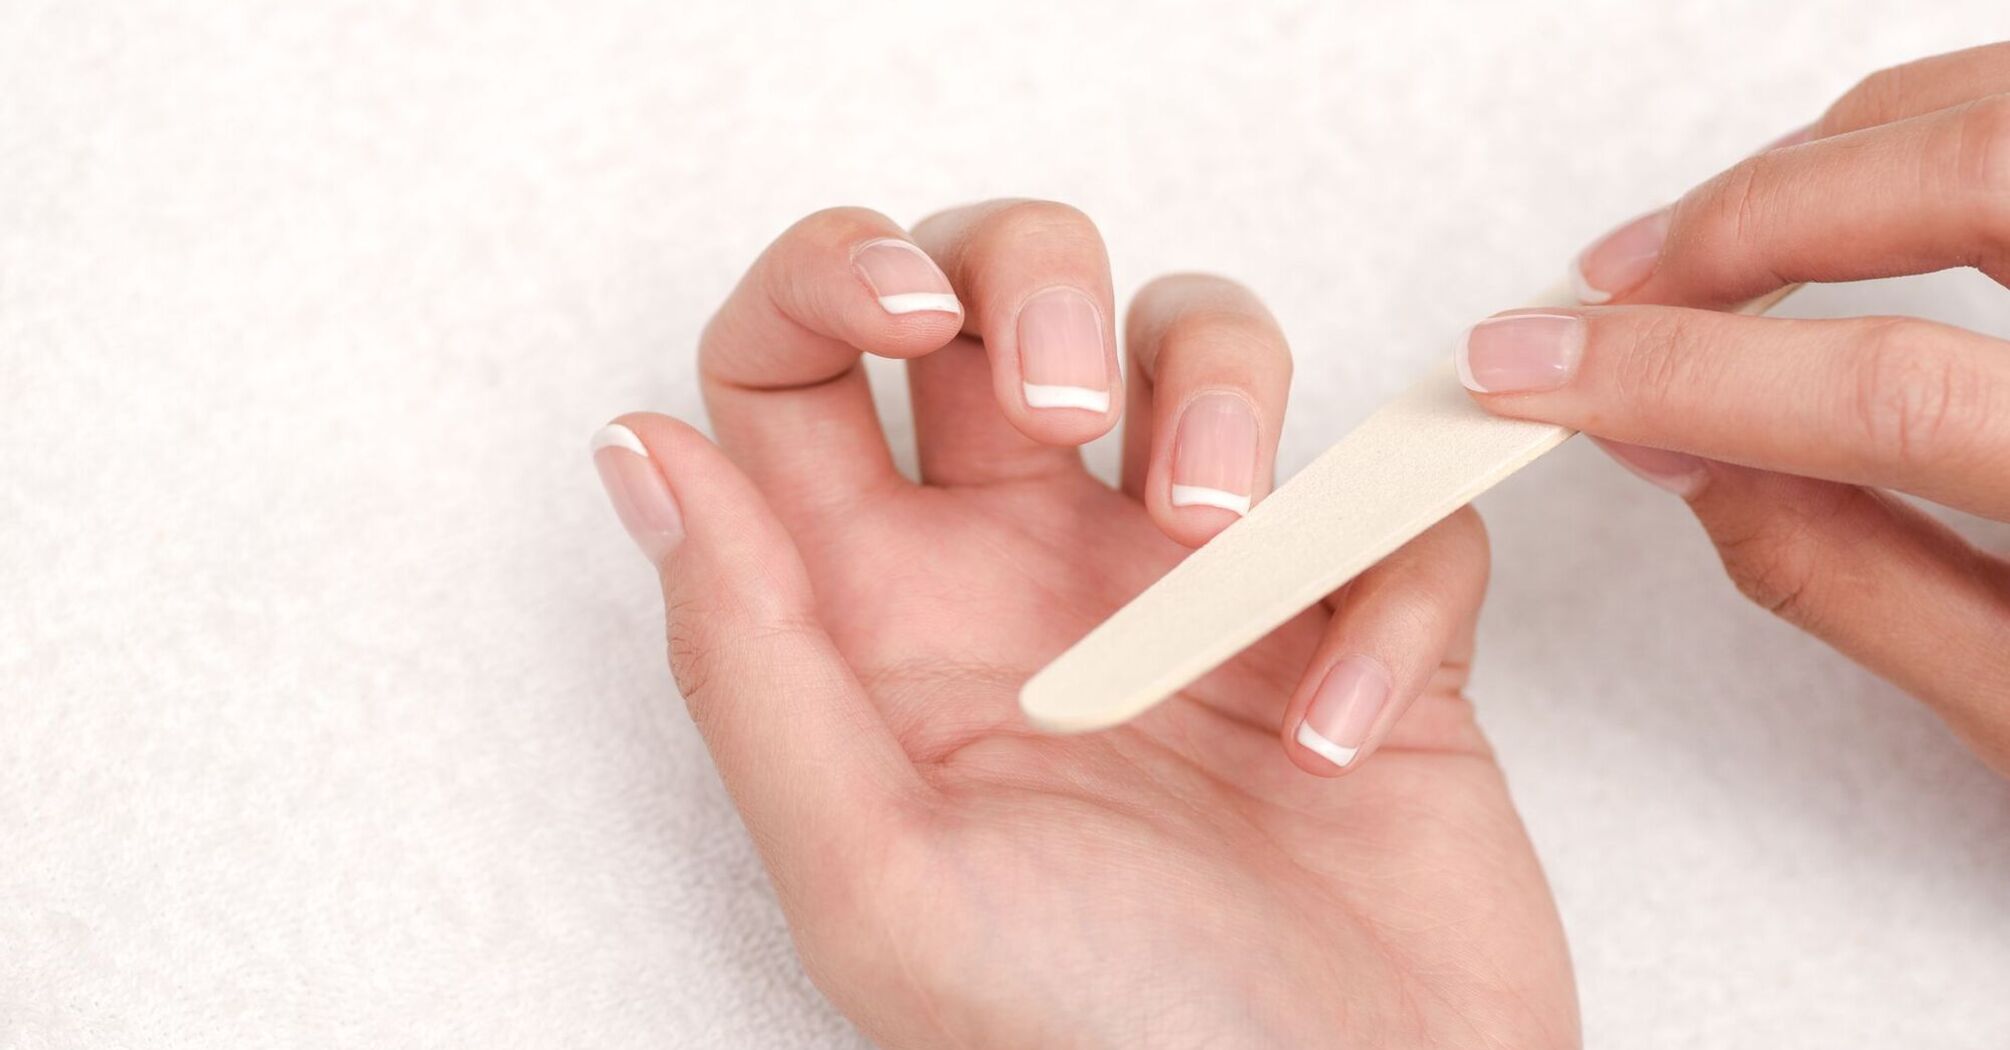 How to strengthen your nails at home